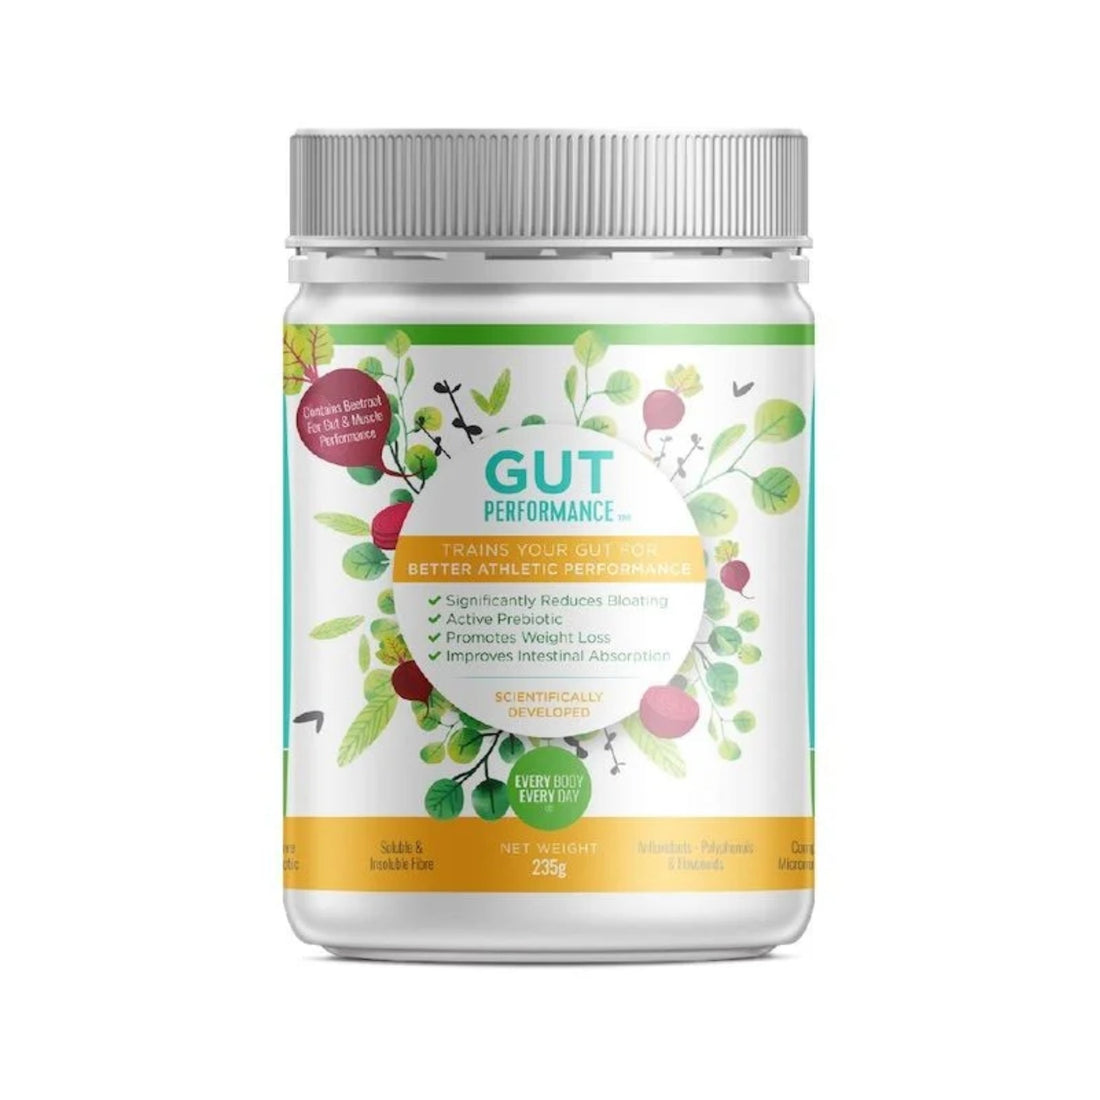 Everybody Everyday Gut Performance Vitamins and Health